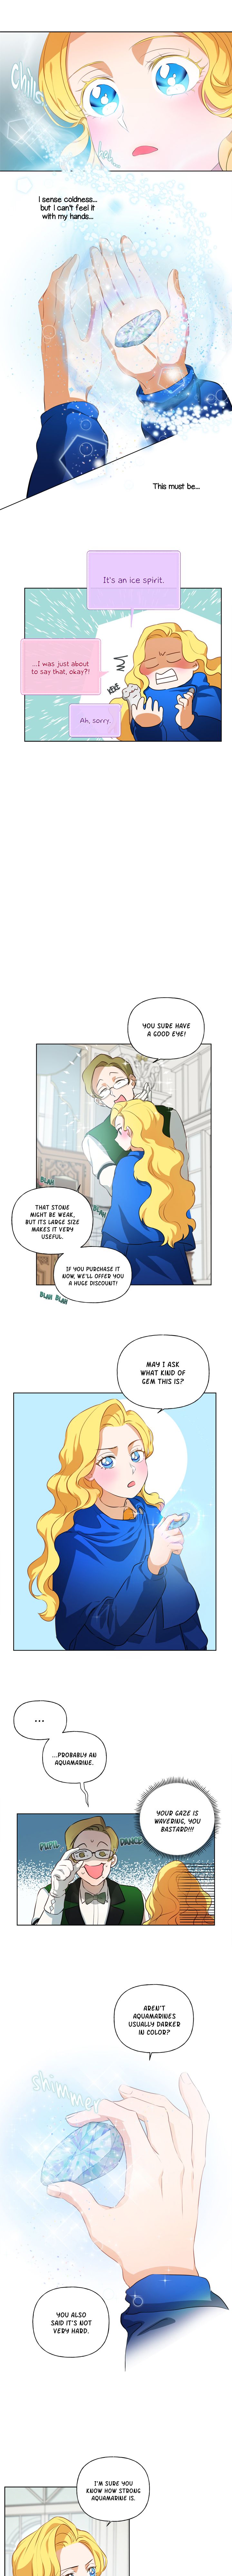 The Golden Haired Wizard - Page 2